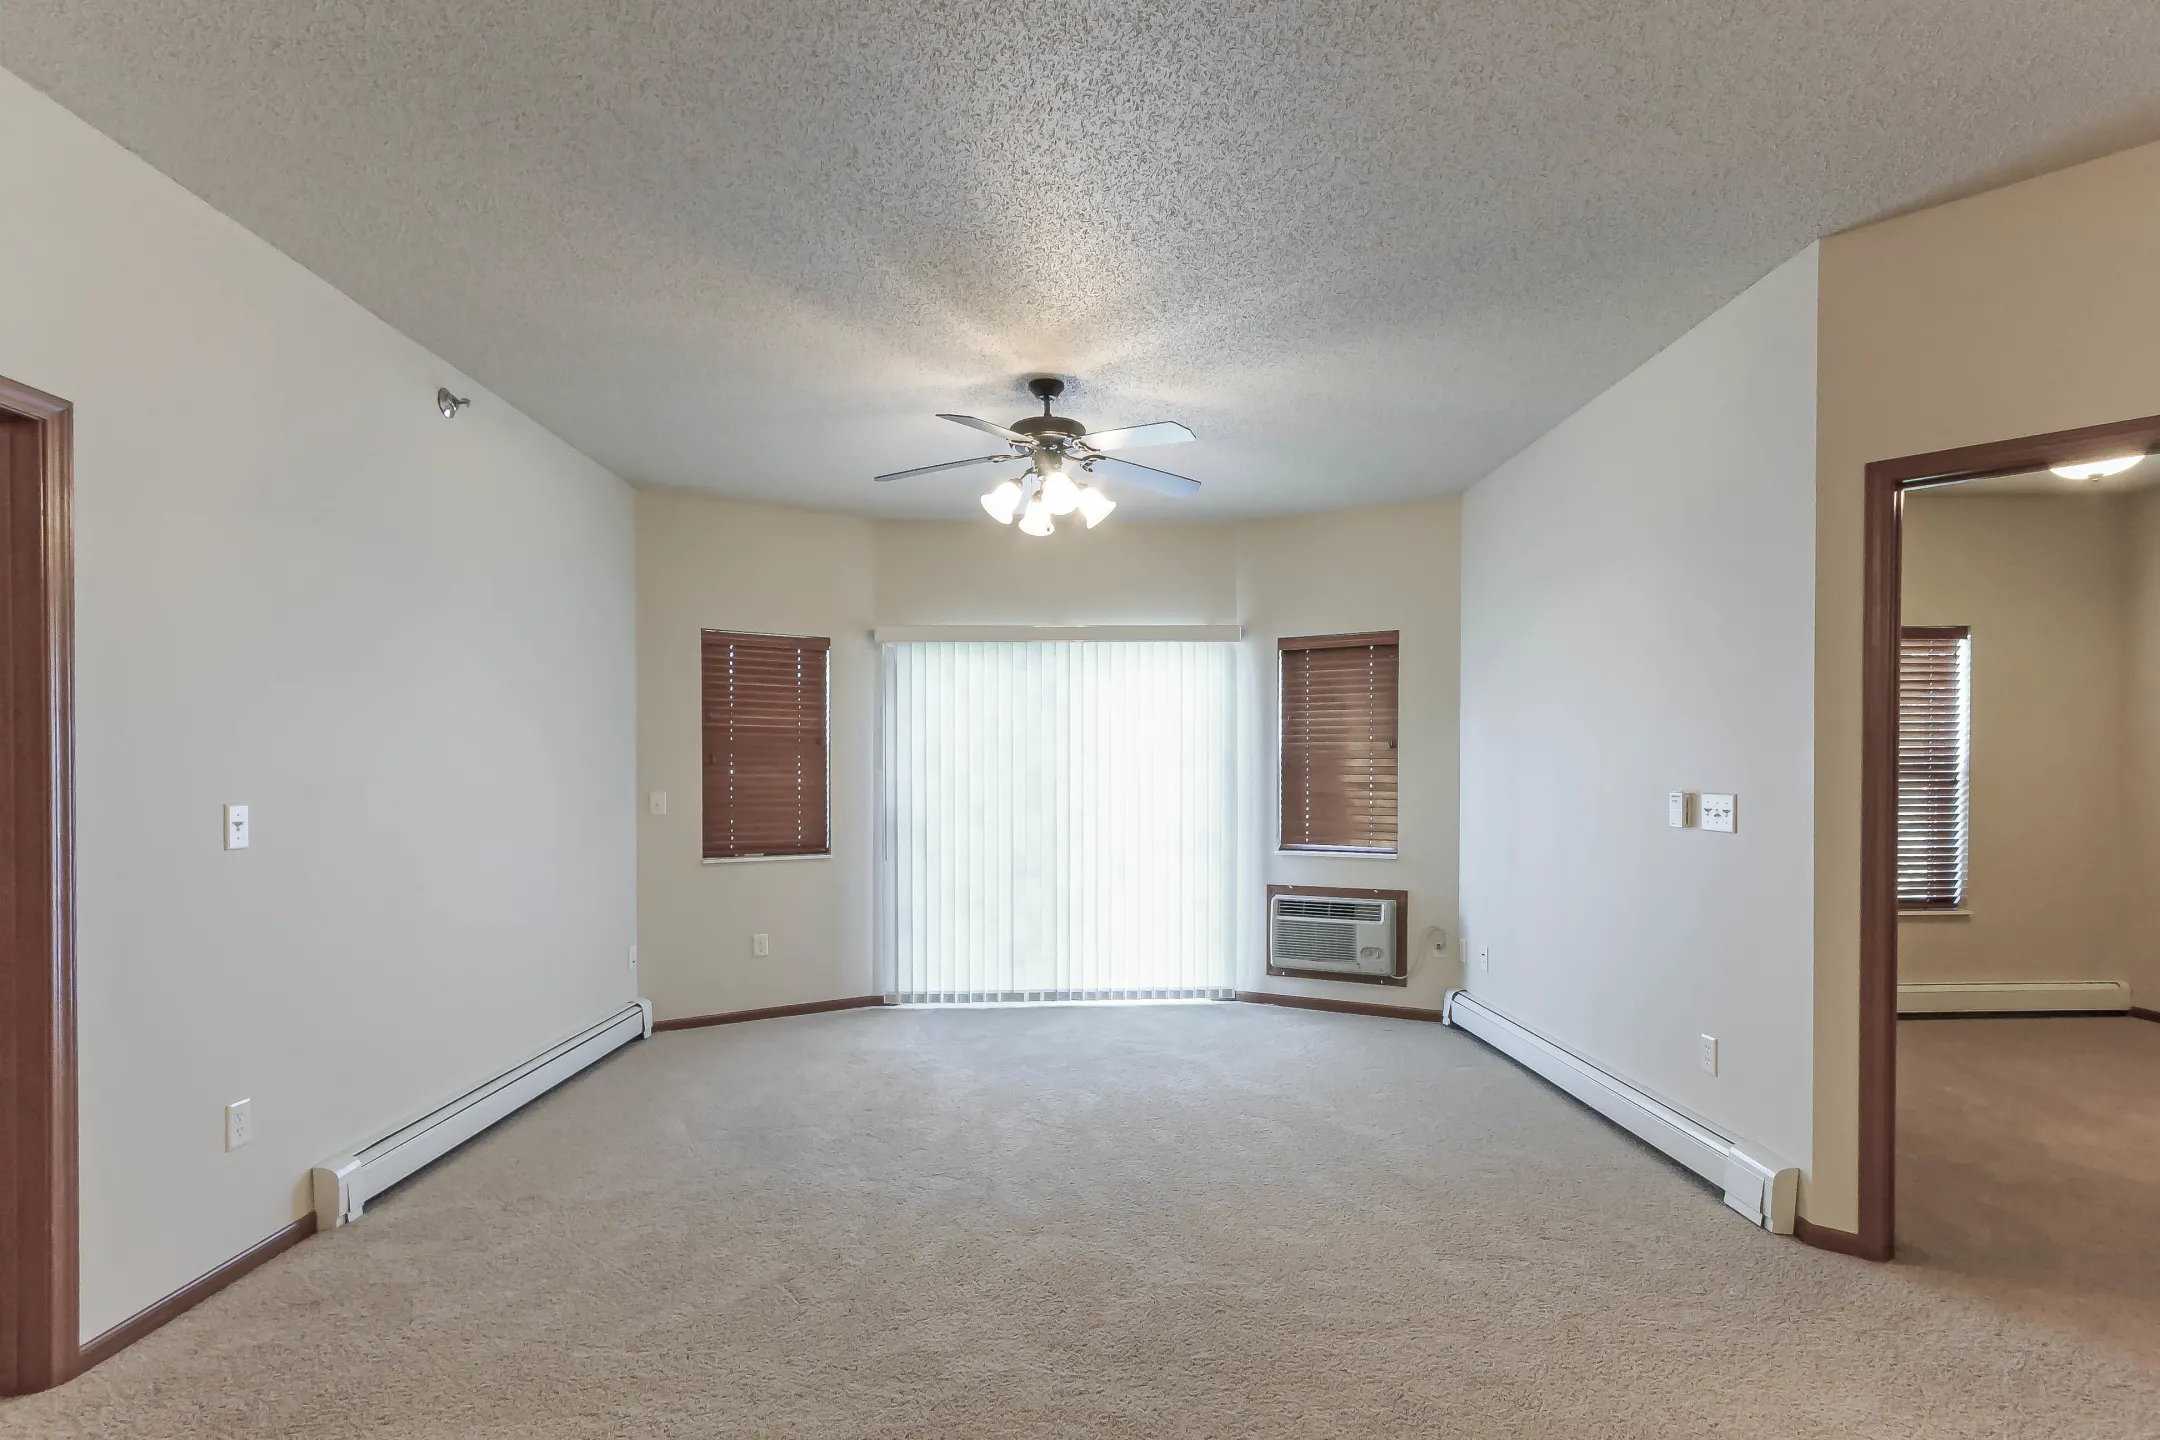 Living Room - HighPointe Apartments - Fargo, ND